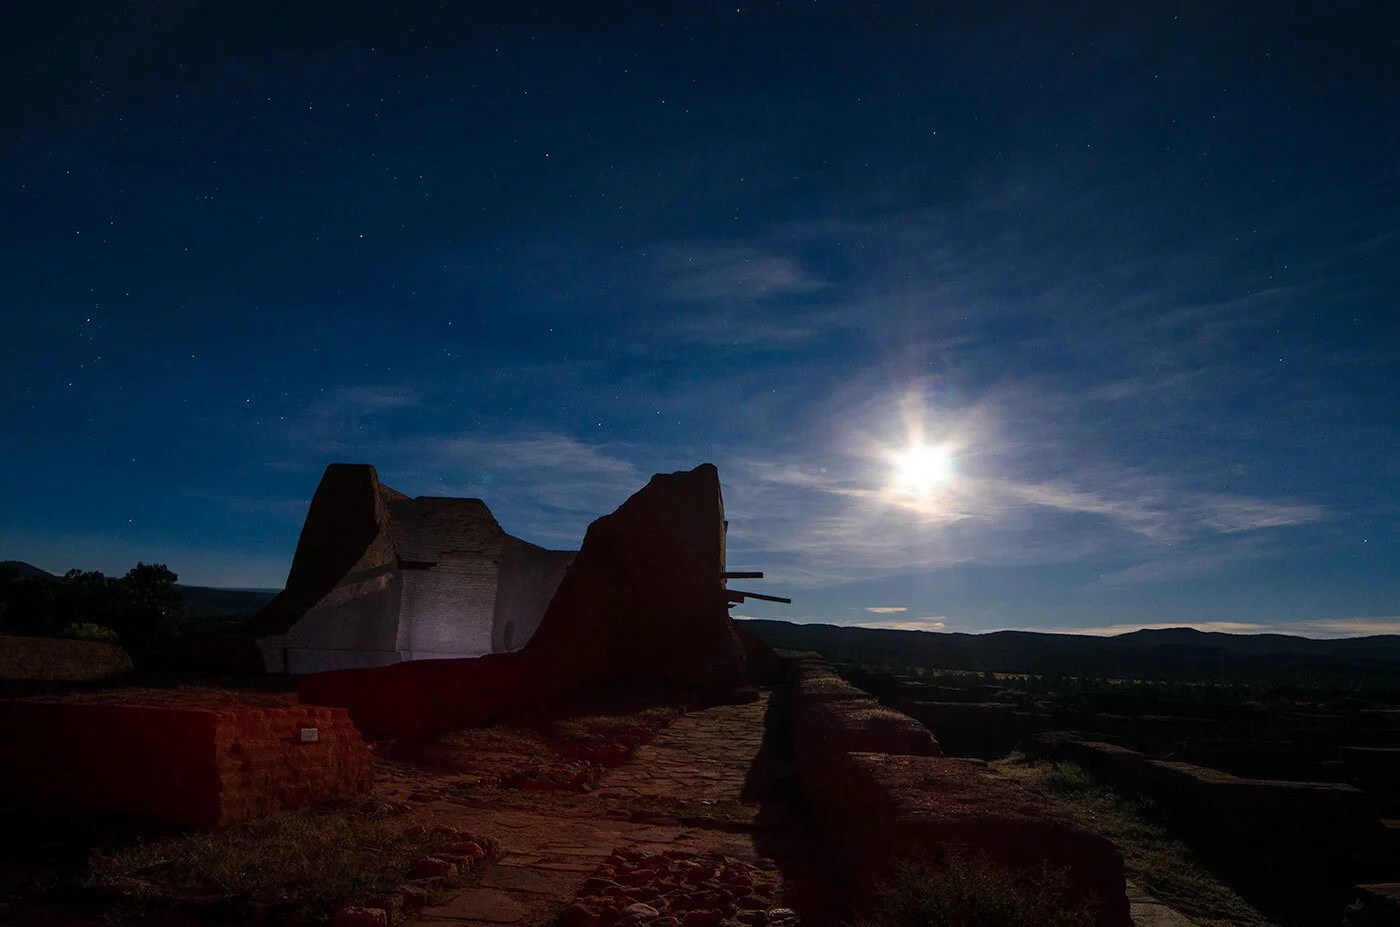 A bright Moon lights up the ruins of an old Spanish mission in New Mexico.